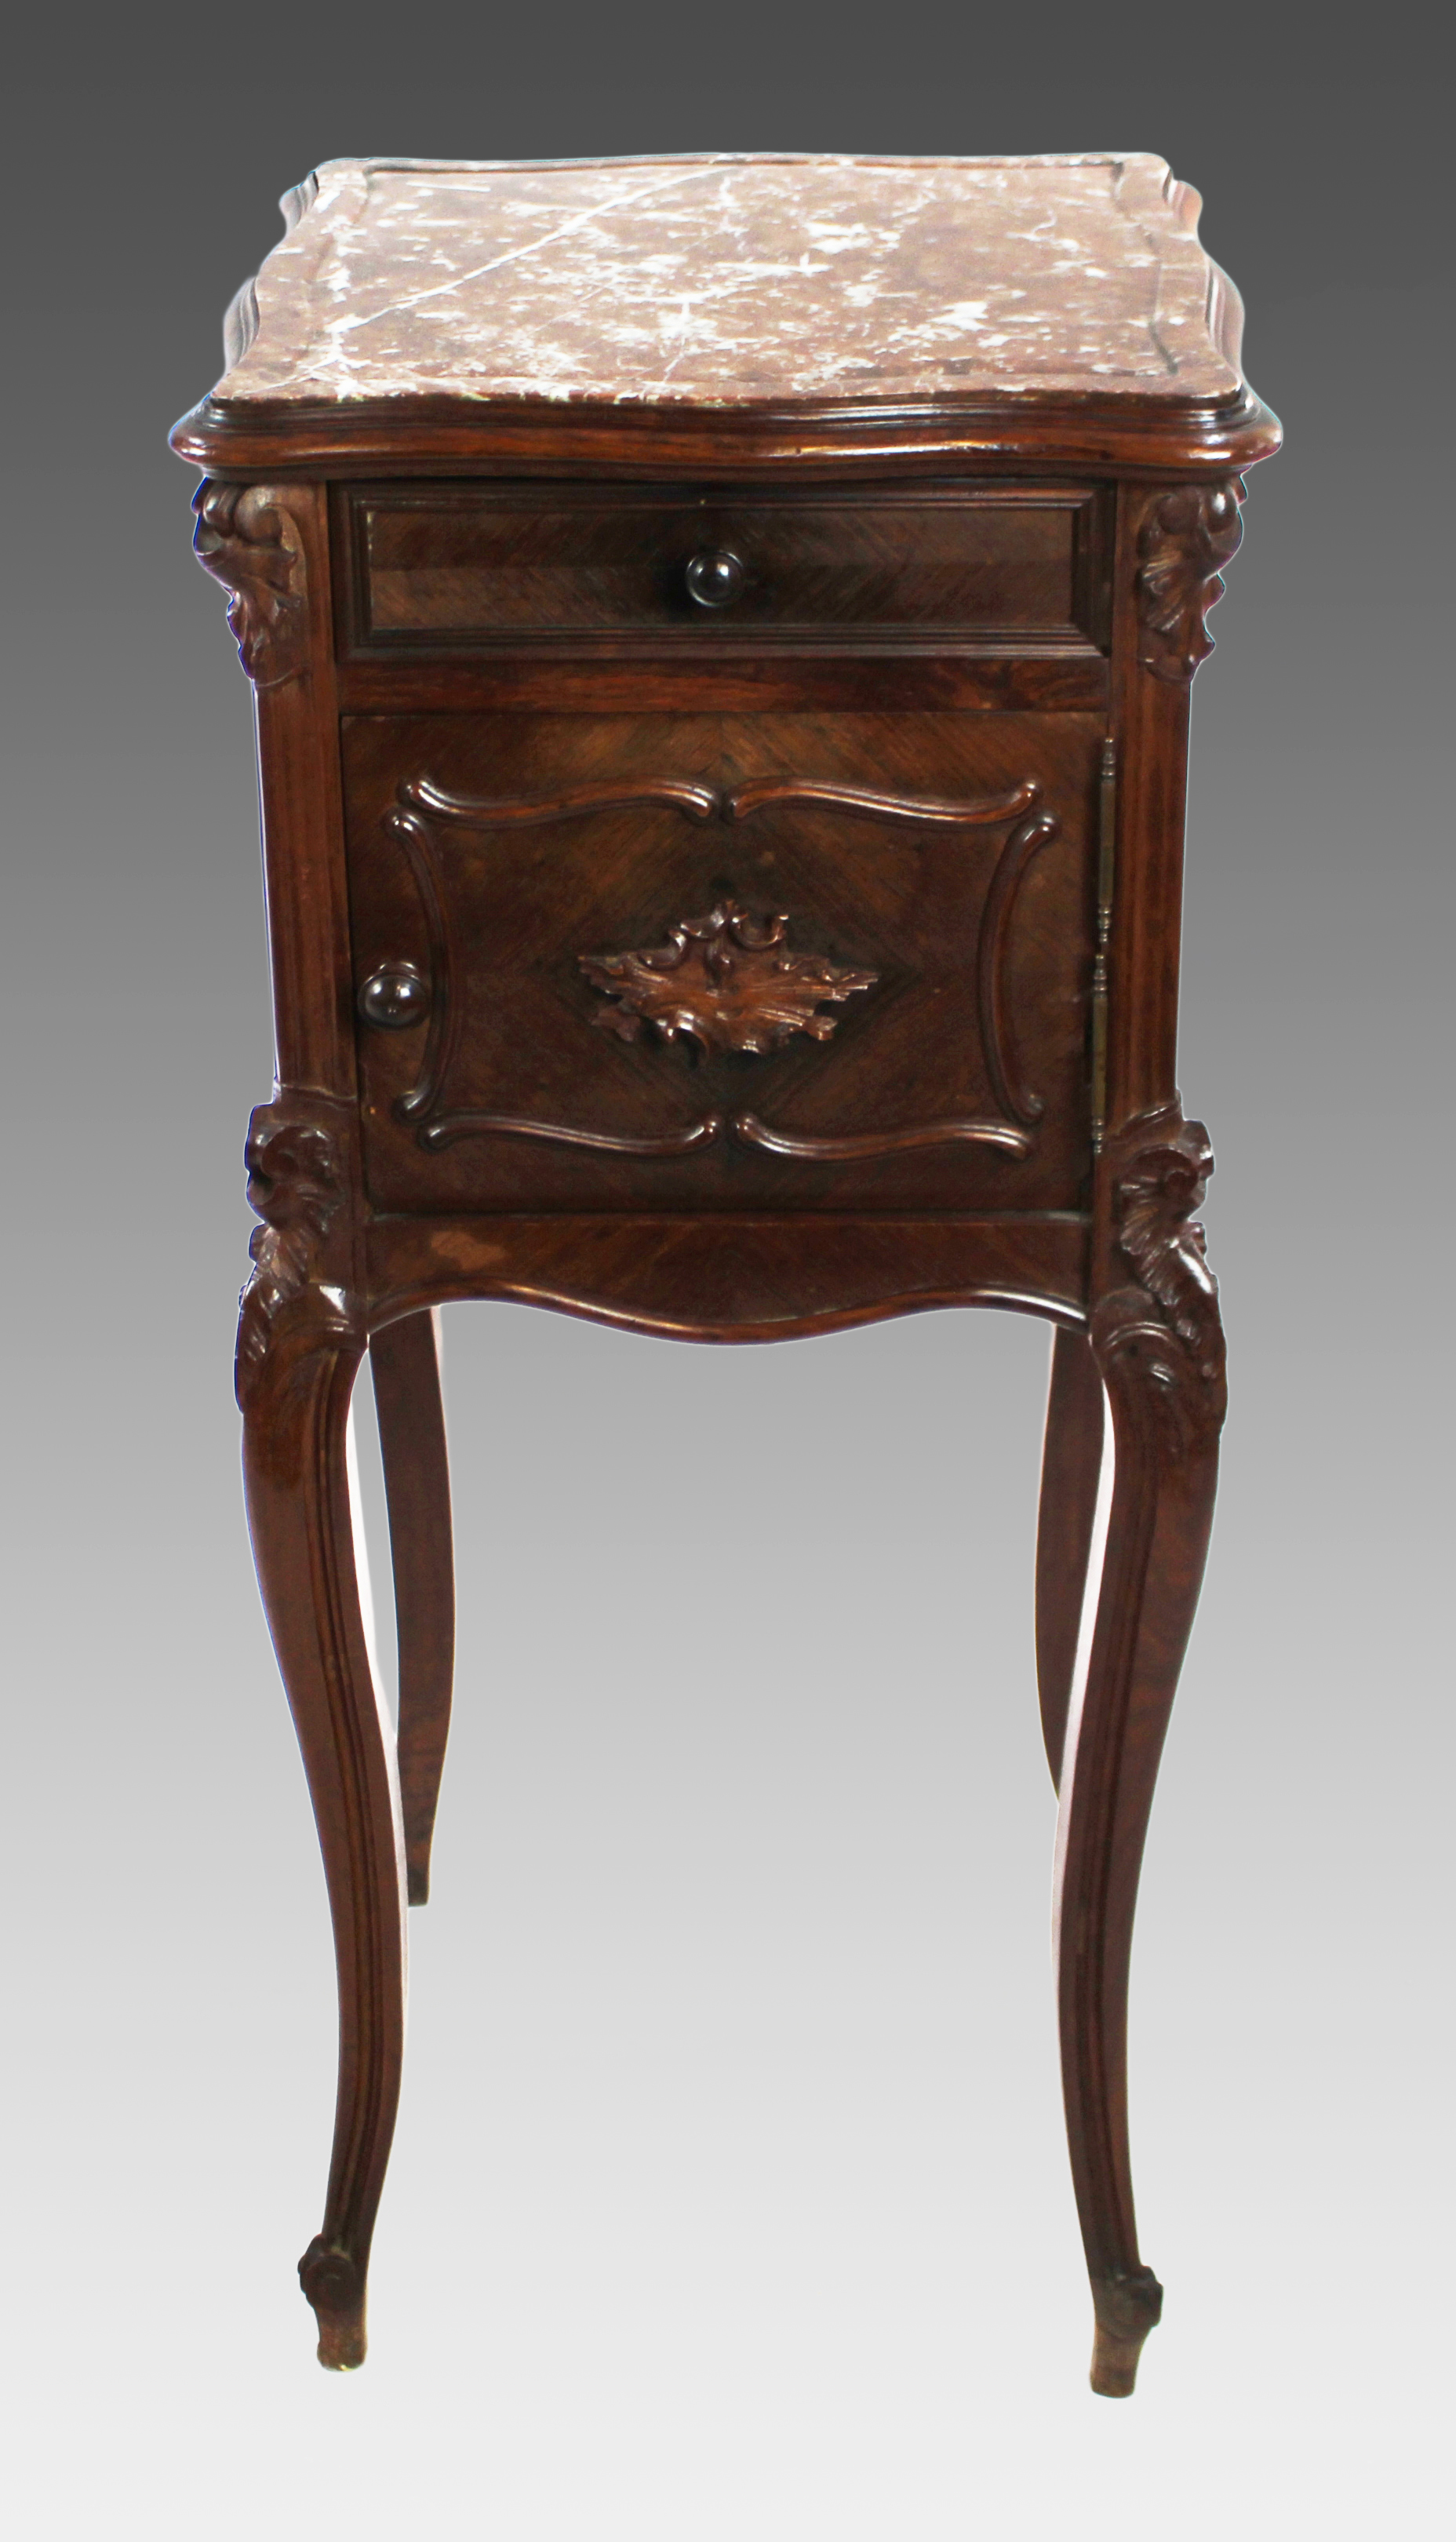 19th c. French Marble Topped Pot Cupboard - Image 2 of 7